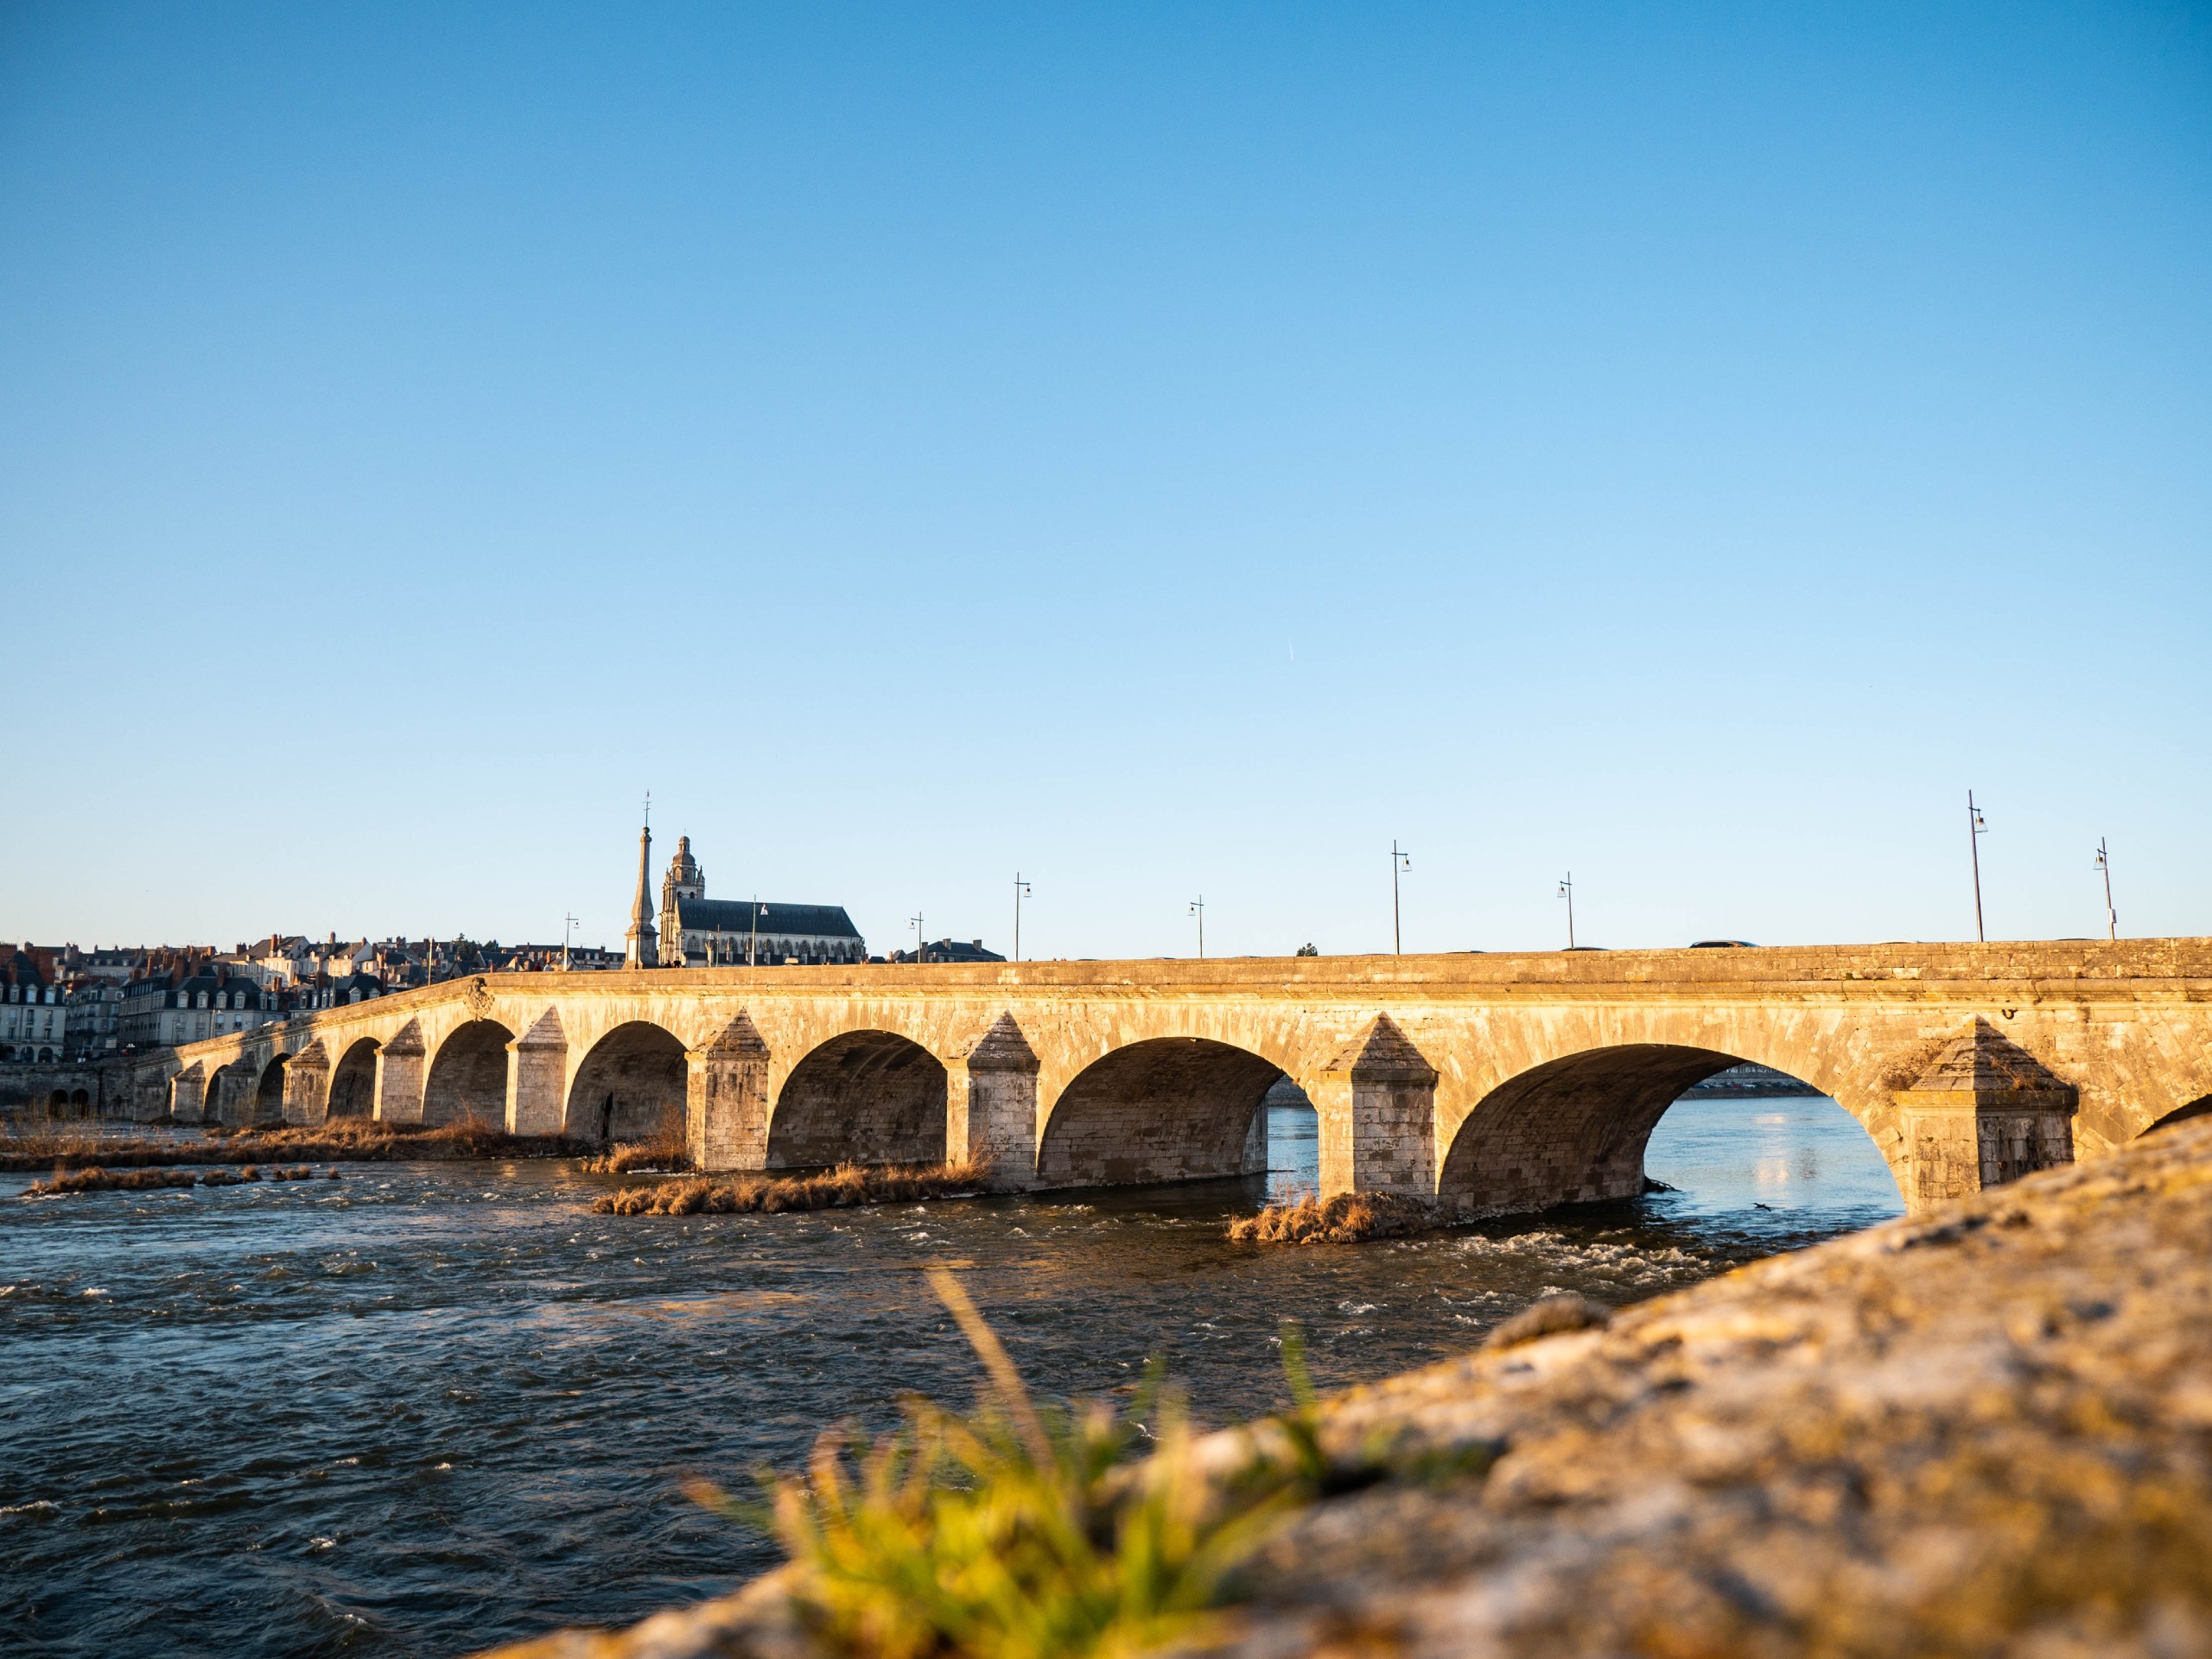 Bridge over the Loire river, as seen on Orléans to Saumur